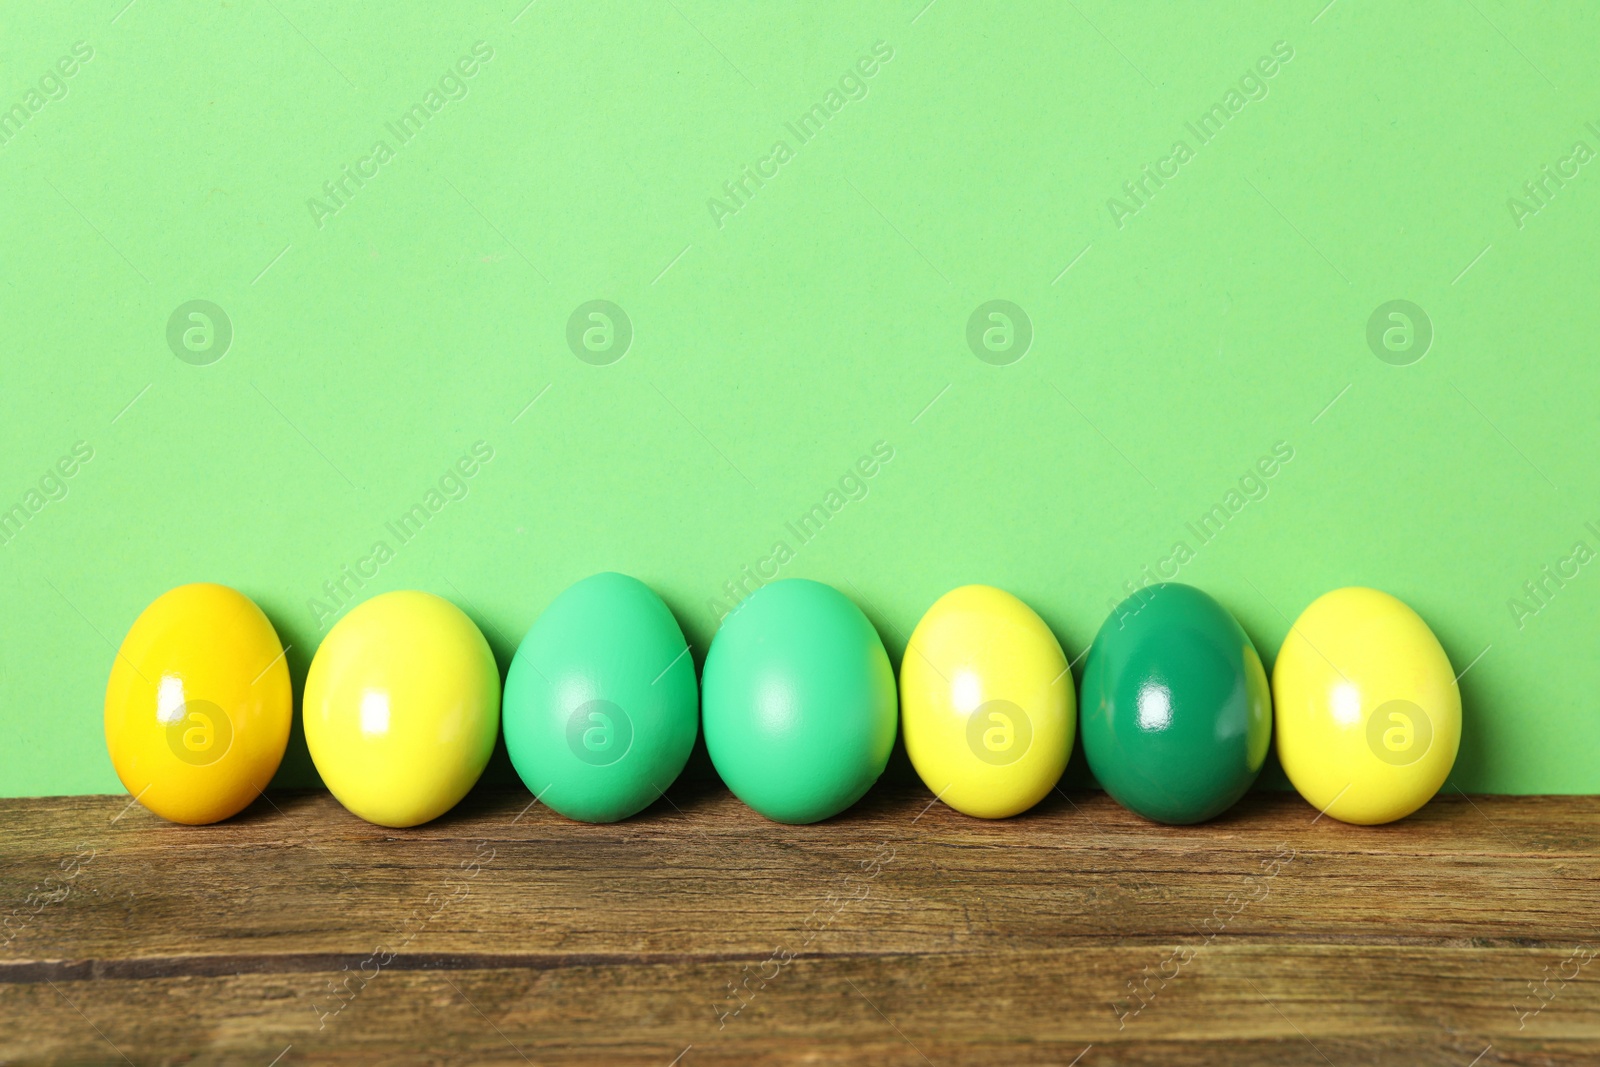 Photo of Easter eggs on wooden table against green background, space for text